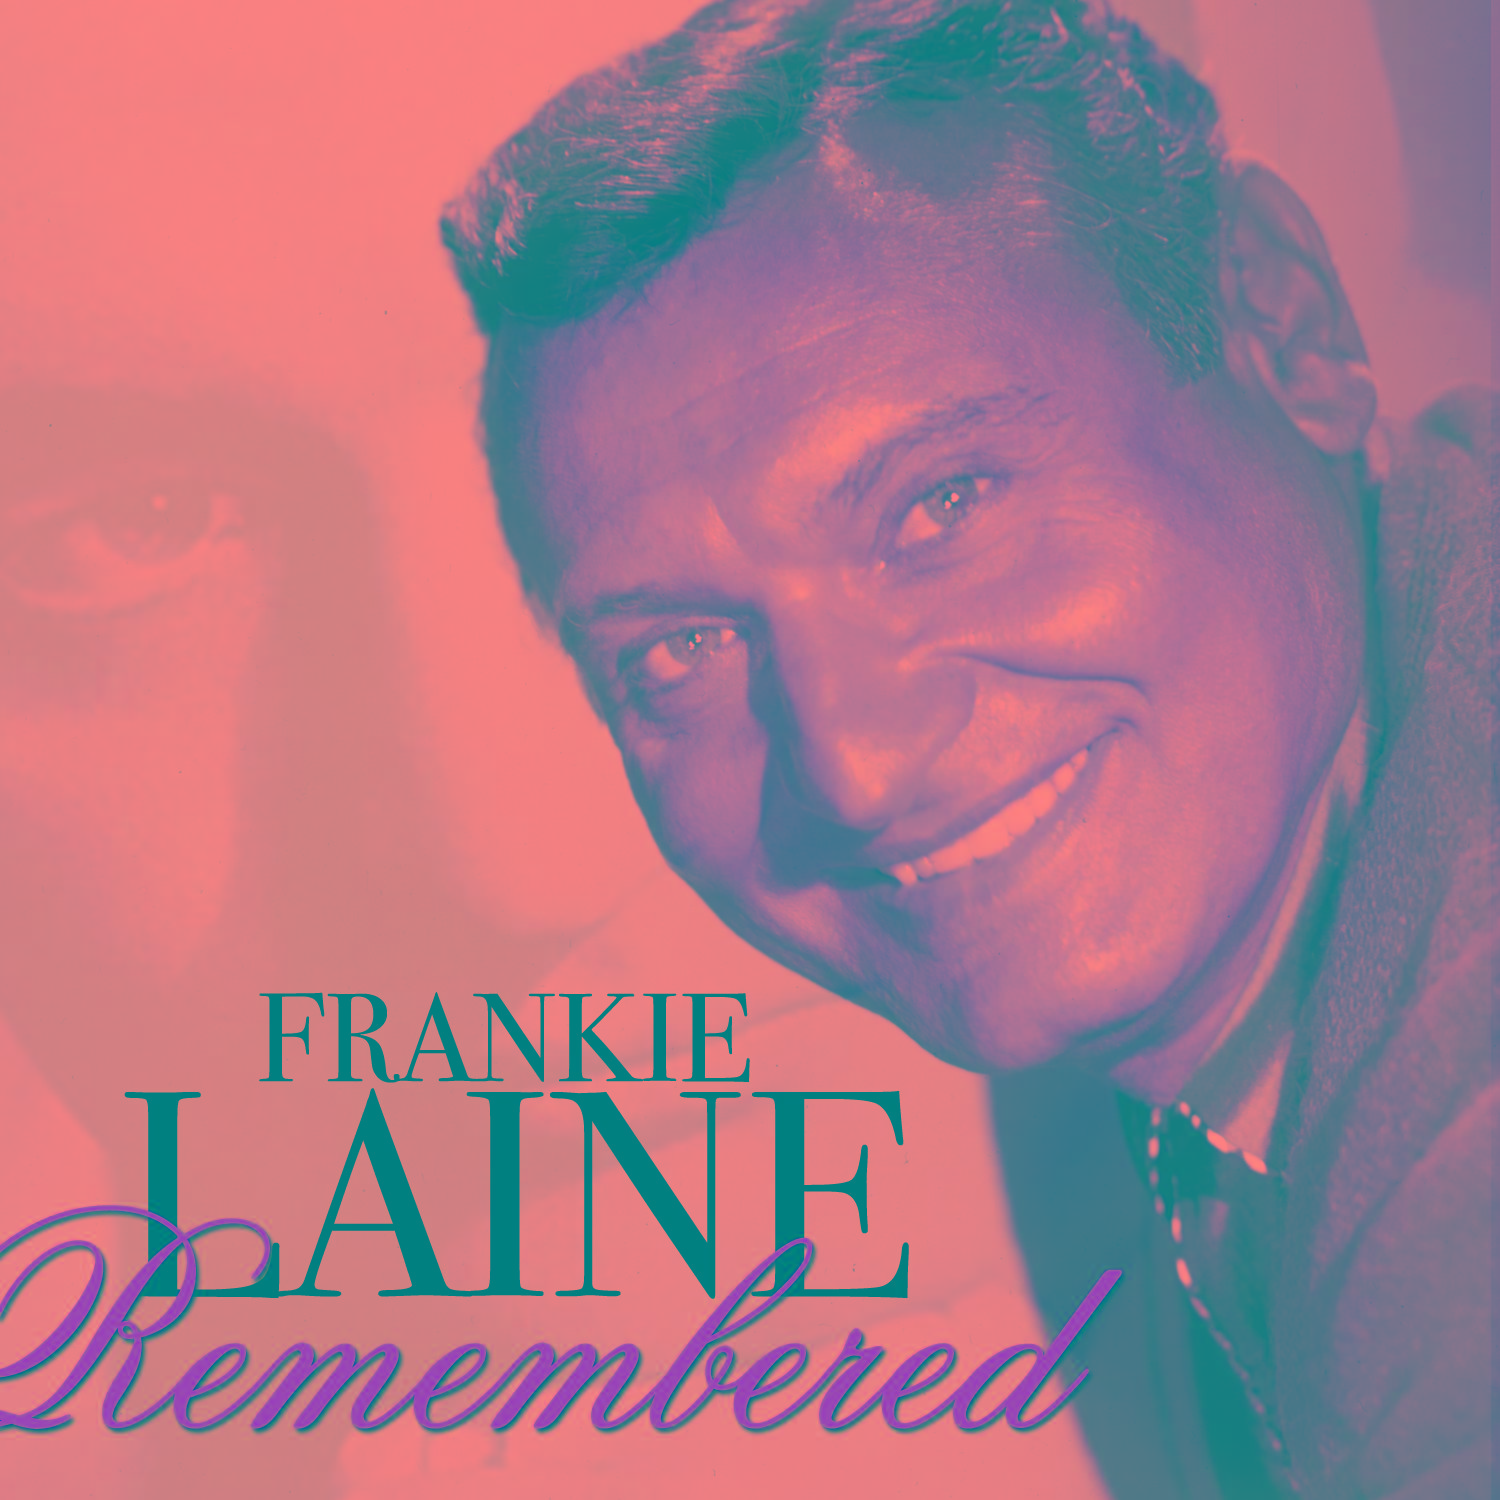 Fankie Laine Remembered